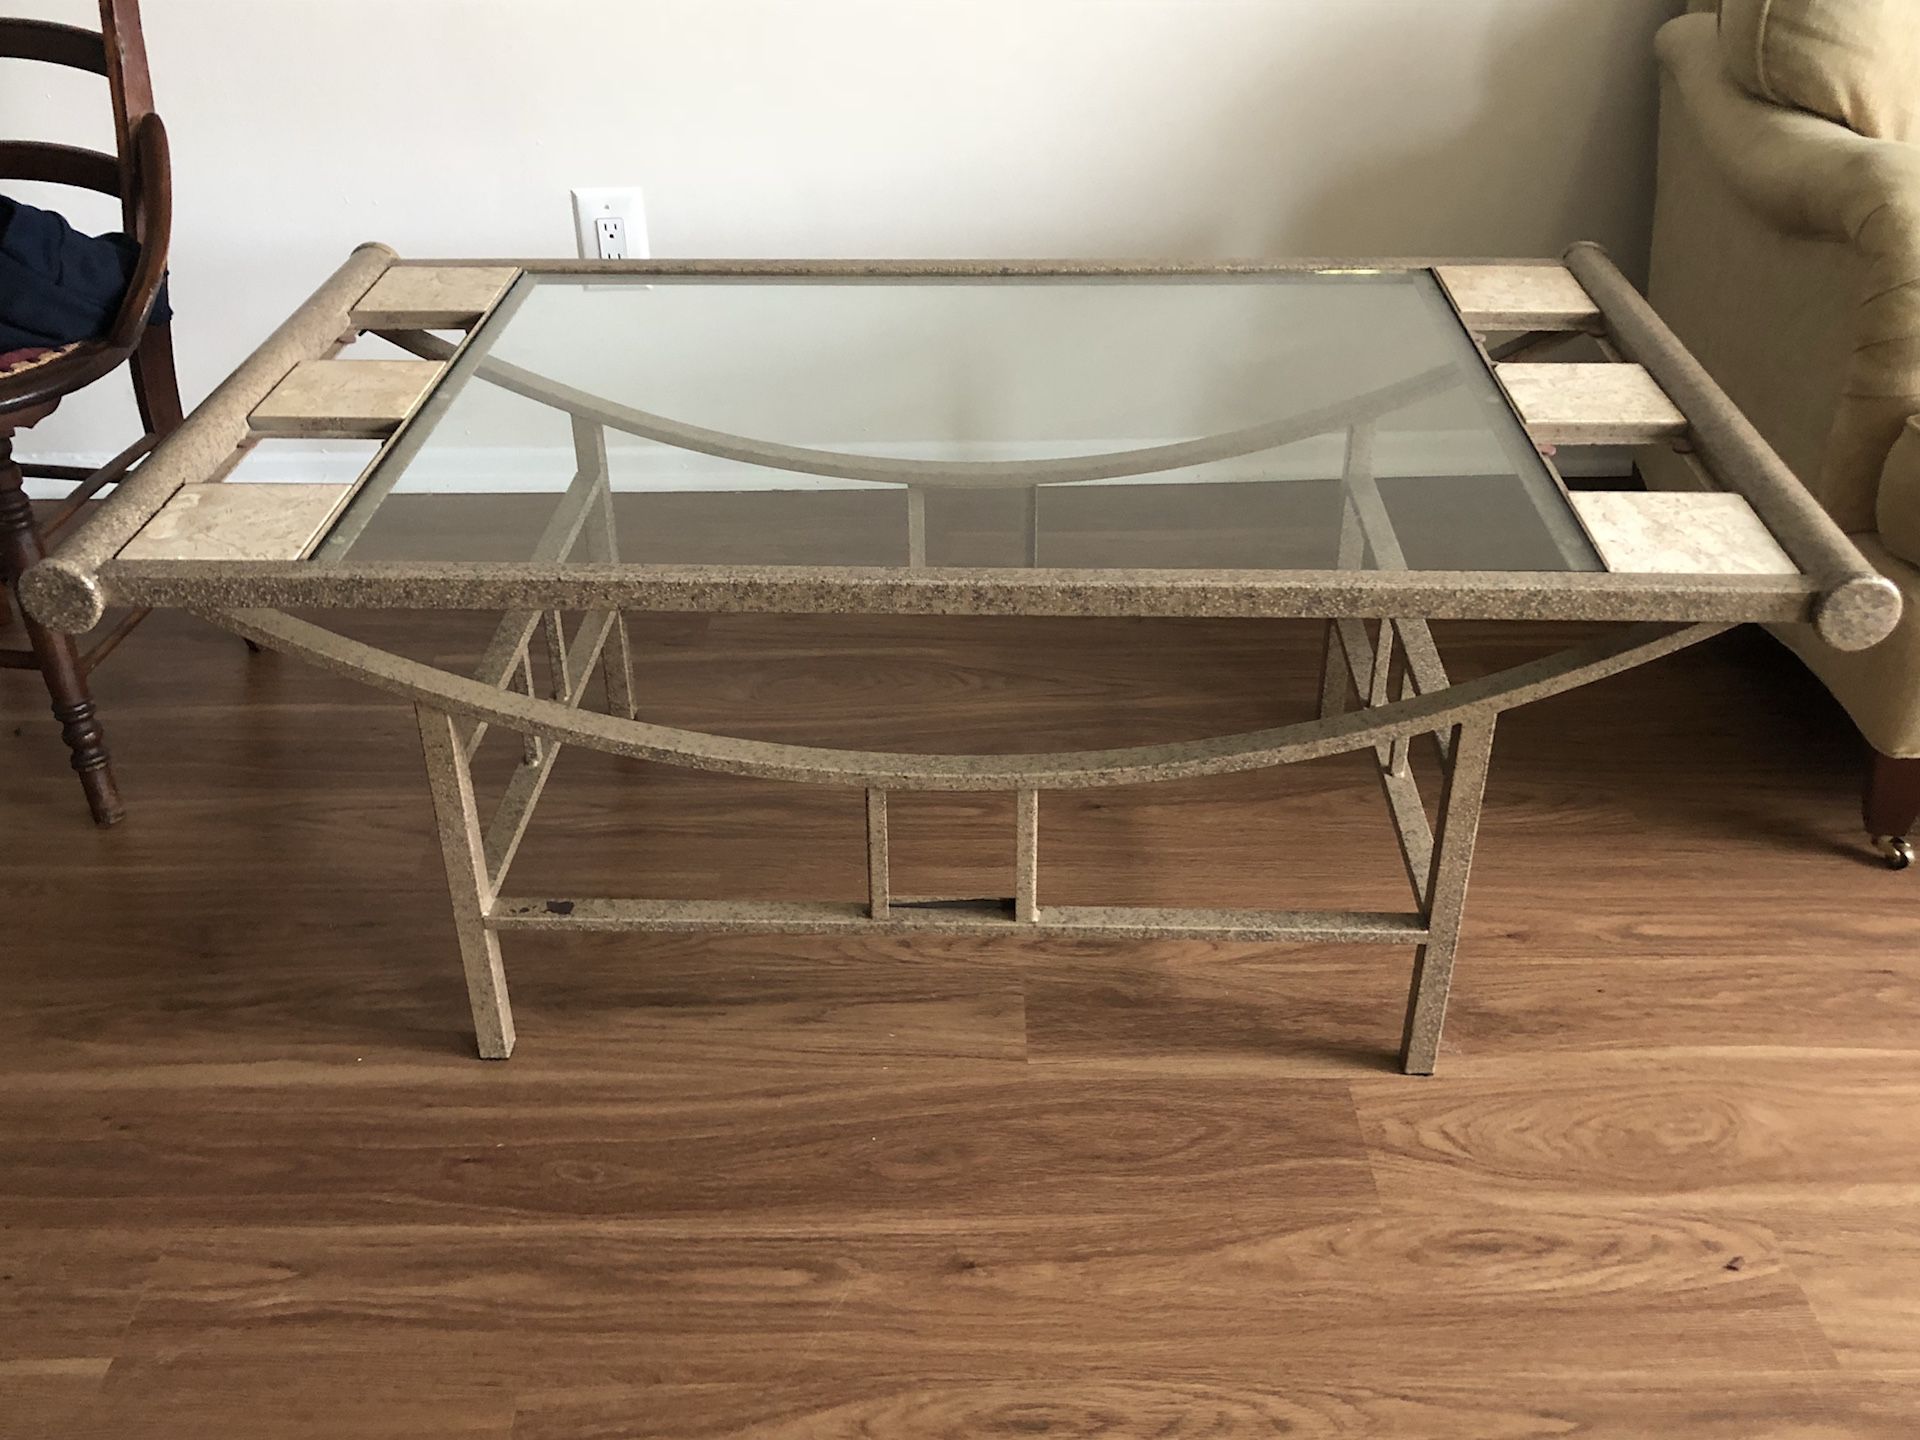 Stainless Steel and Glass Table w/ Marble Tiles